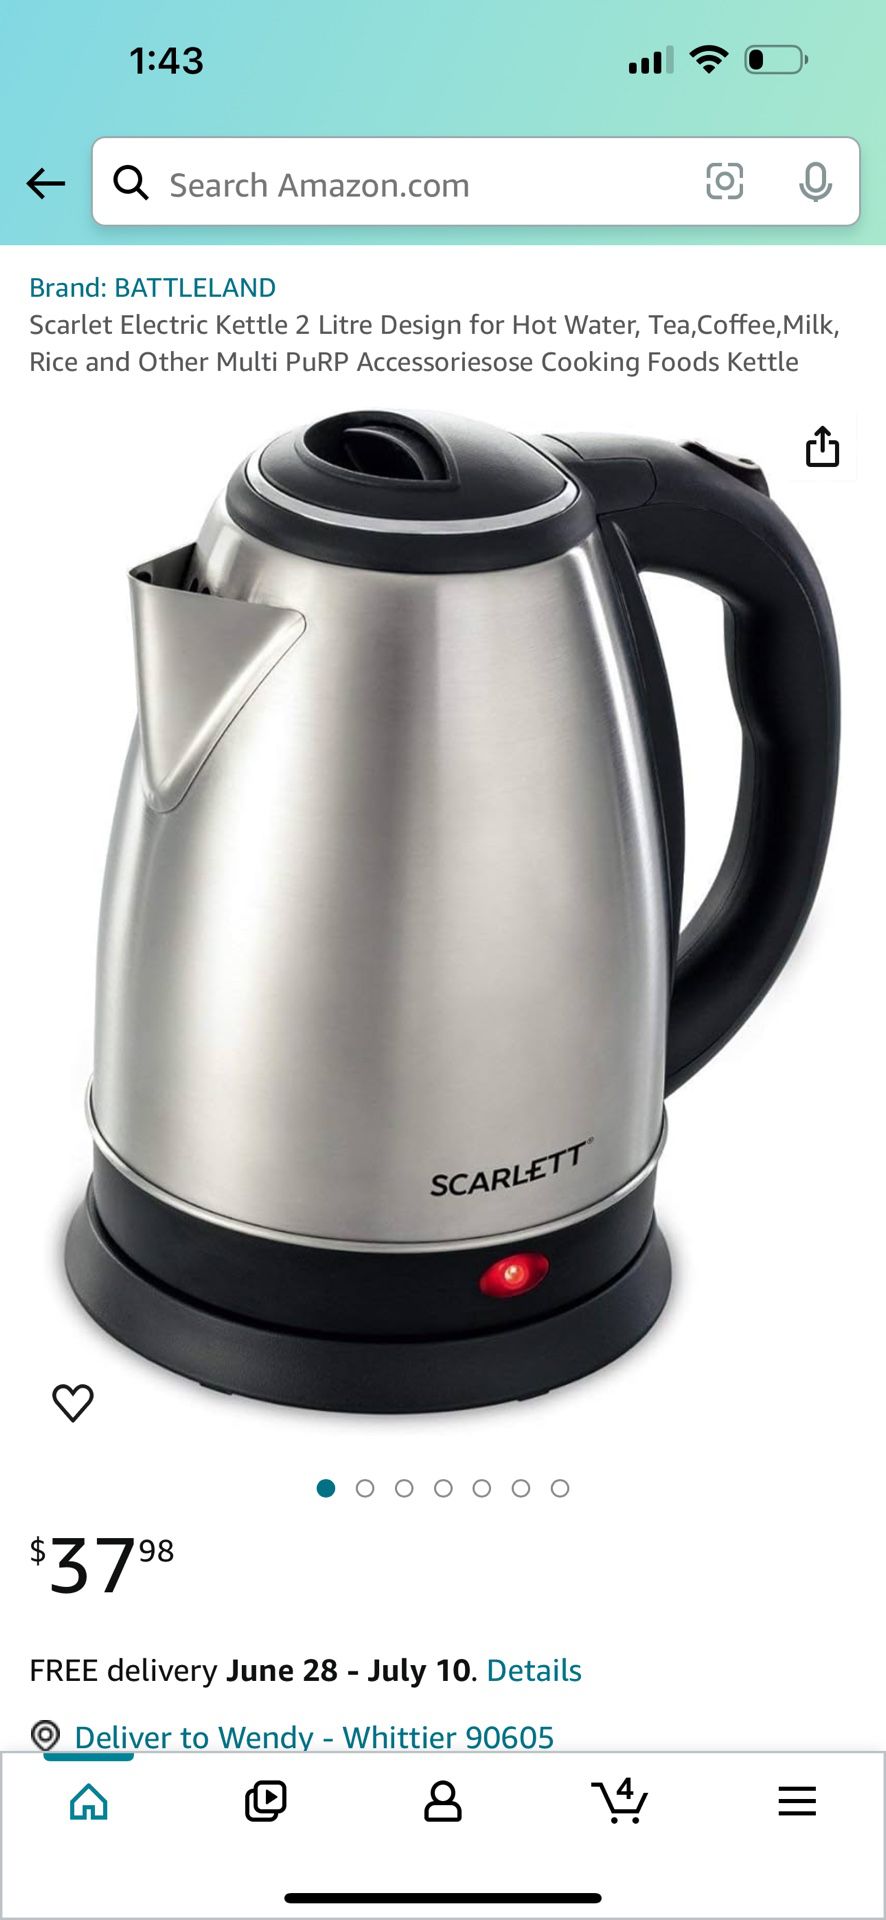 Scarlet Electric Kettle 2 Litre Design for Hot Water, Tea,Coffee,Milk, Rice and Other Multi PuRP Accessoriesose Cooking Foods Kettle